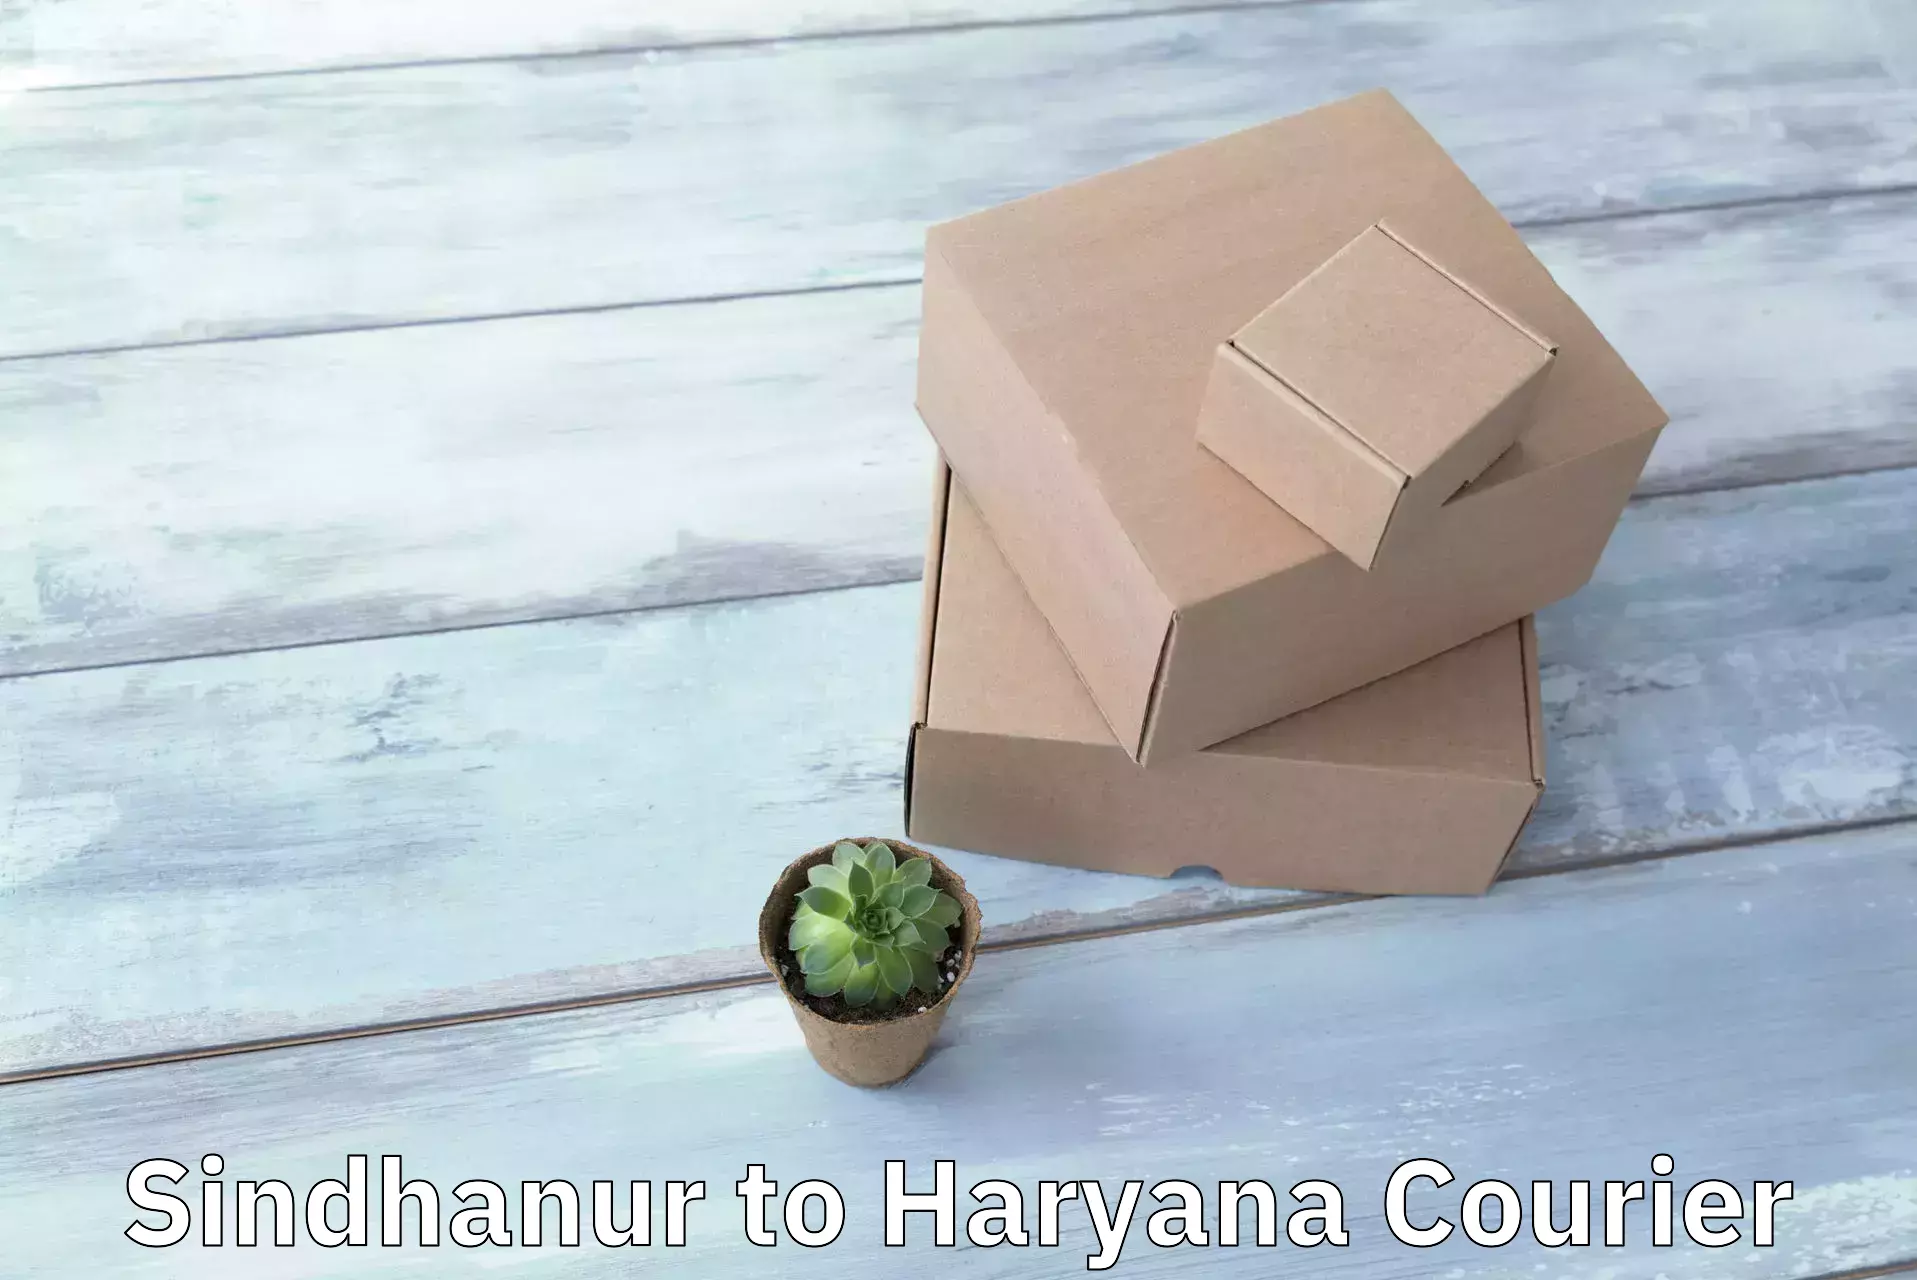 Nationwide delivery network Sindhanur to Haryana